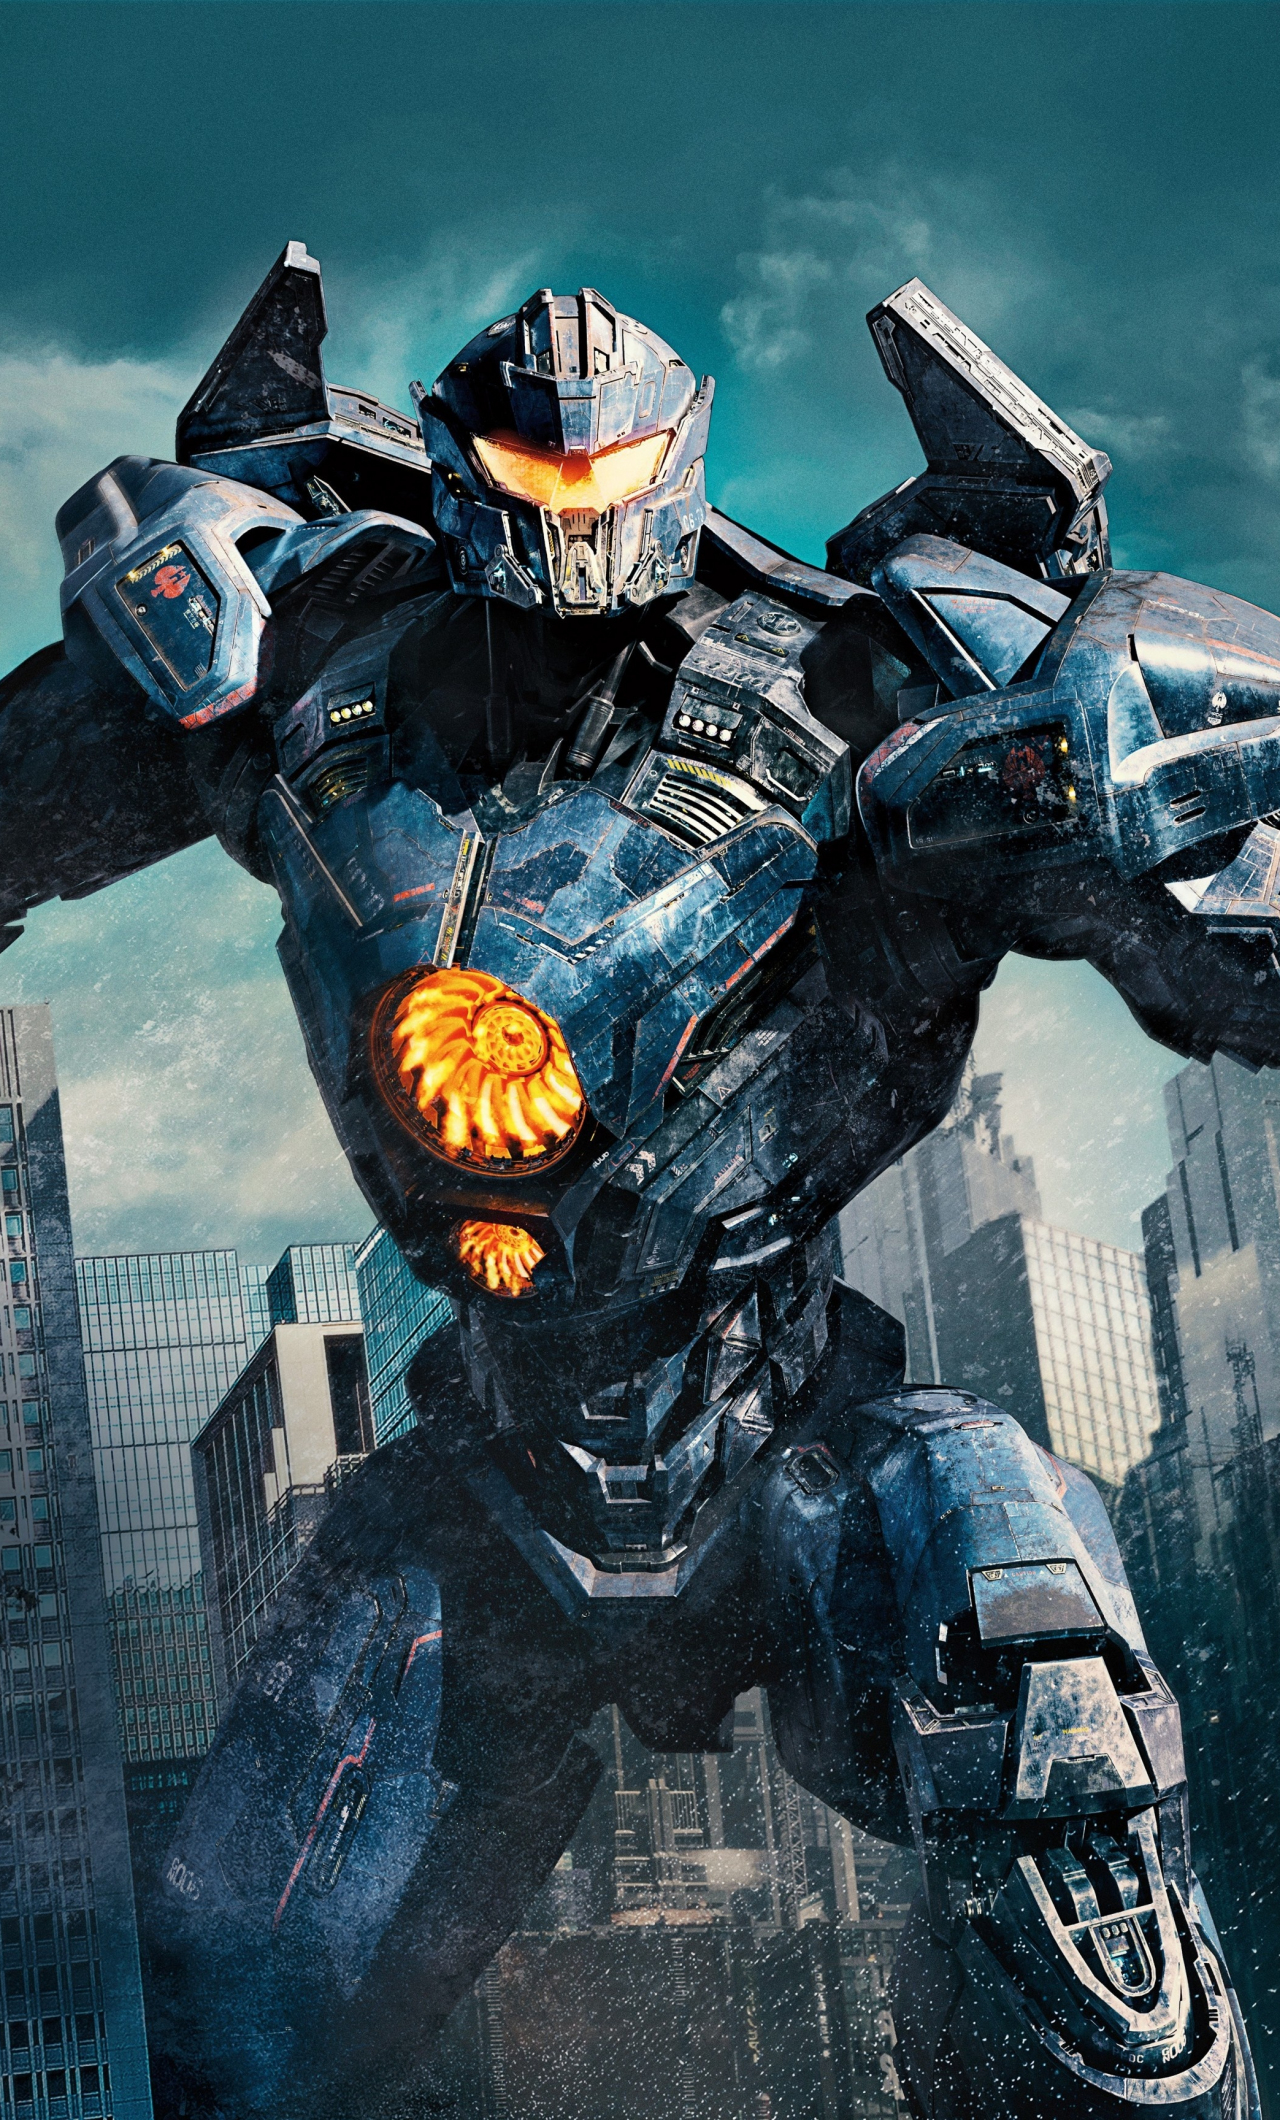 Download wallpaper 1280x2120 pacific rim uprising, gipsy avenger, robot,  iphone 6 plus, 1280x2120 hd background, 4387